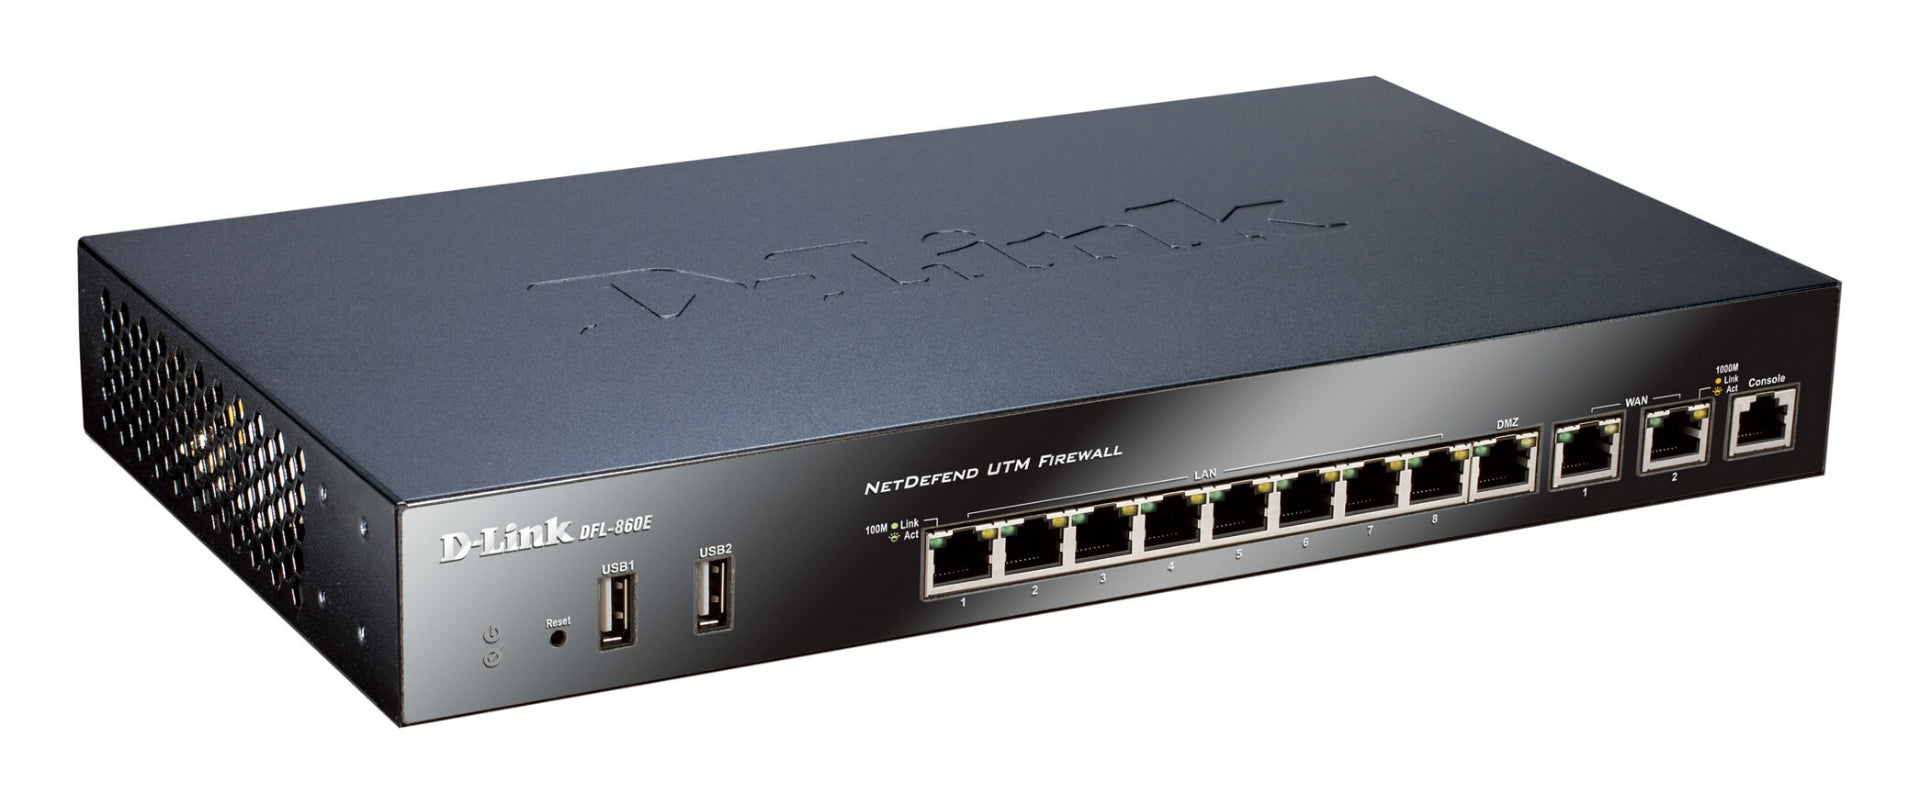 UTM DFL-860E FIREWALL 2X WAN, 7X LAN 1X DMZ, 200M MBPS, 40K CONCURRENT SESSIONS